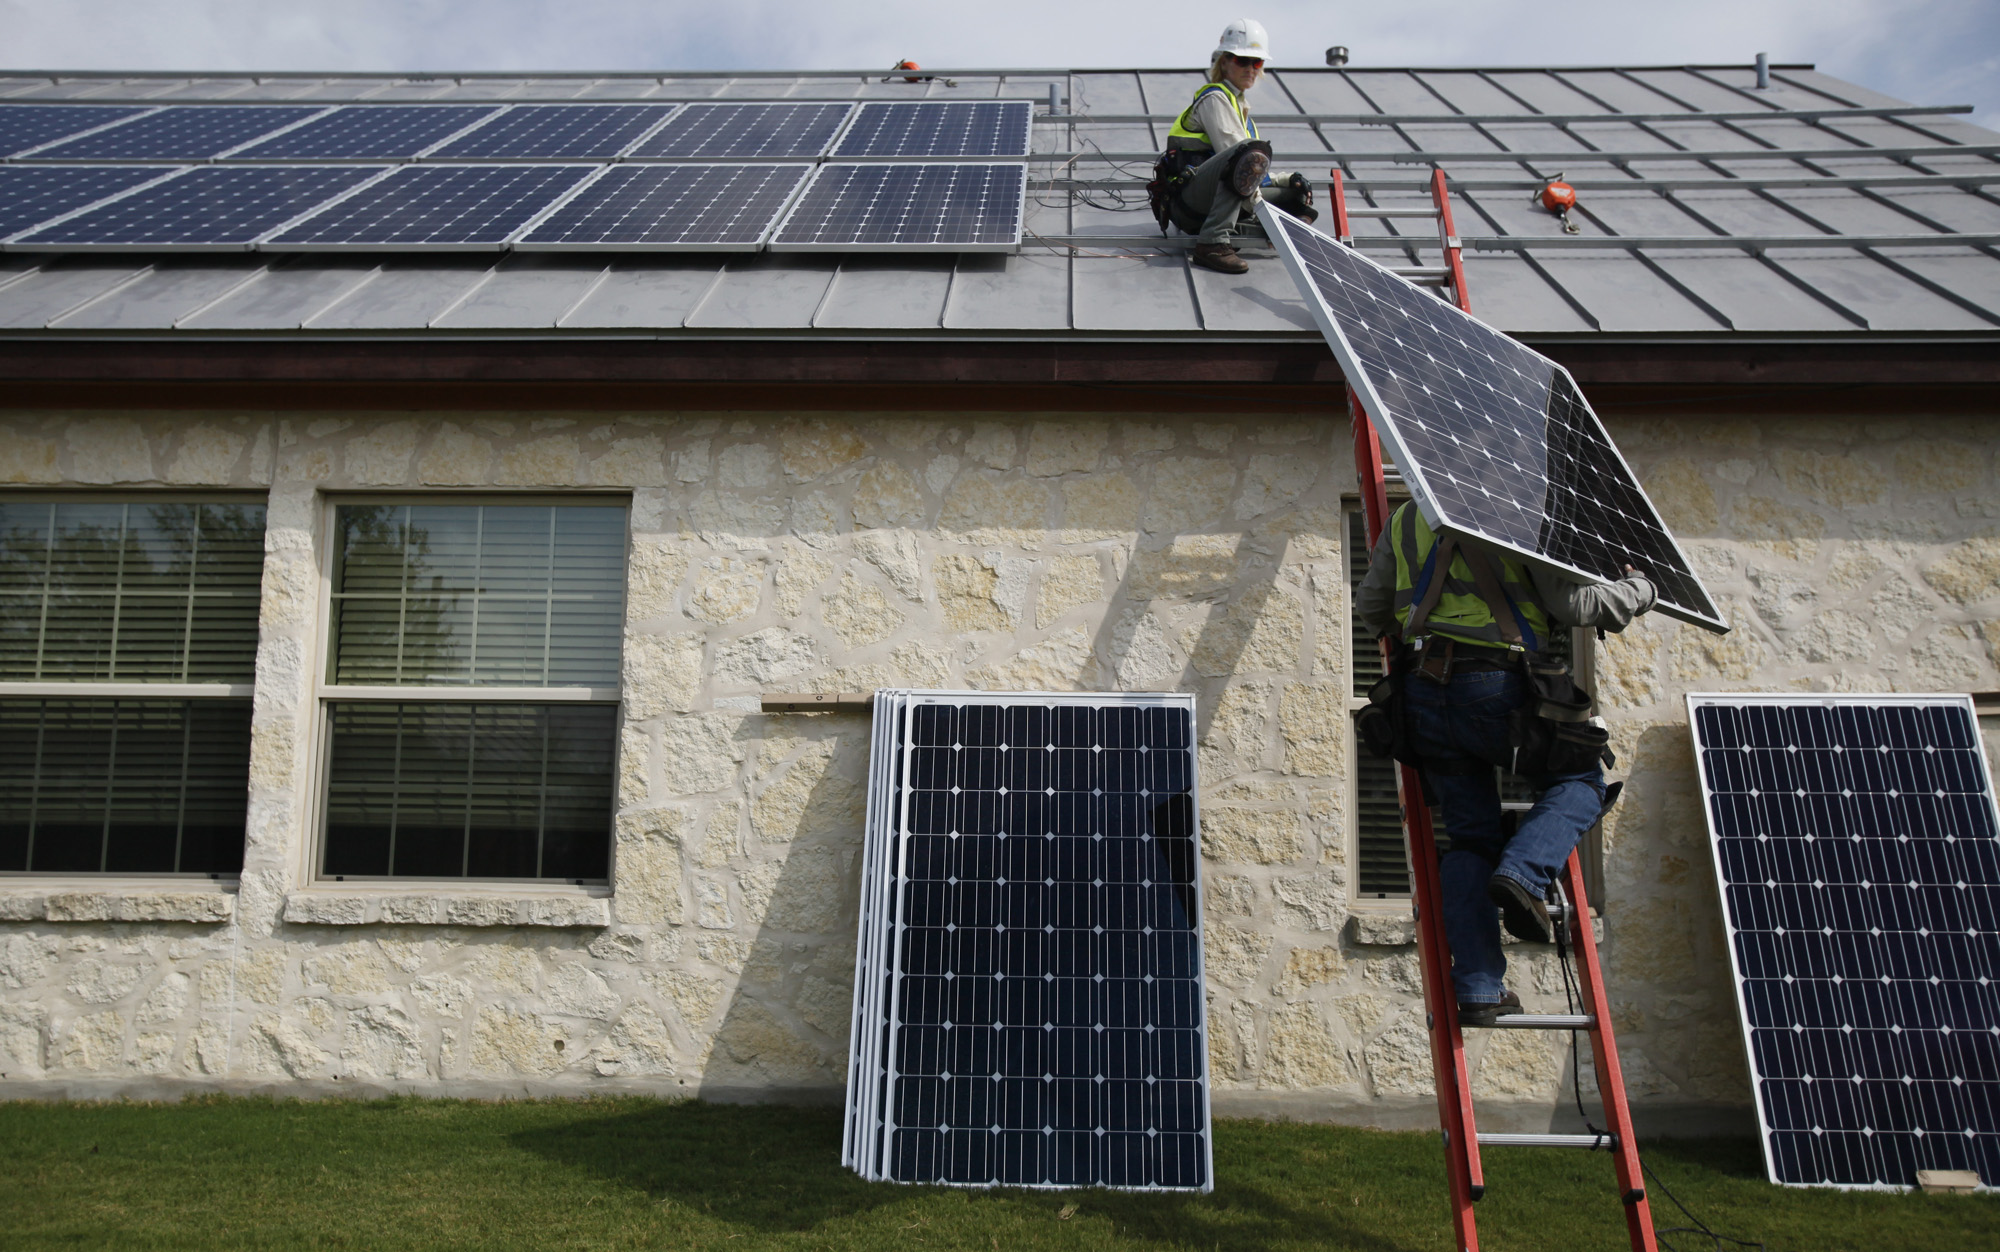 residential-solar-use-up-with-cps-rebate-tax-credit-san-antonio